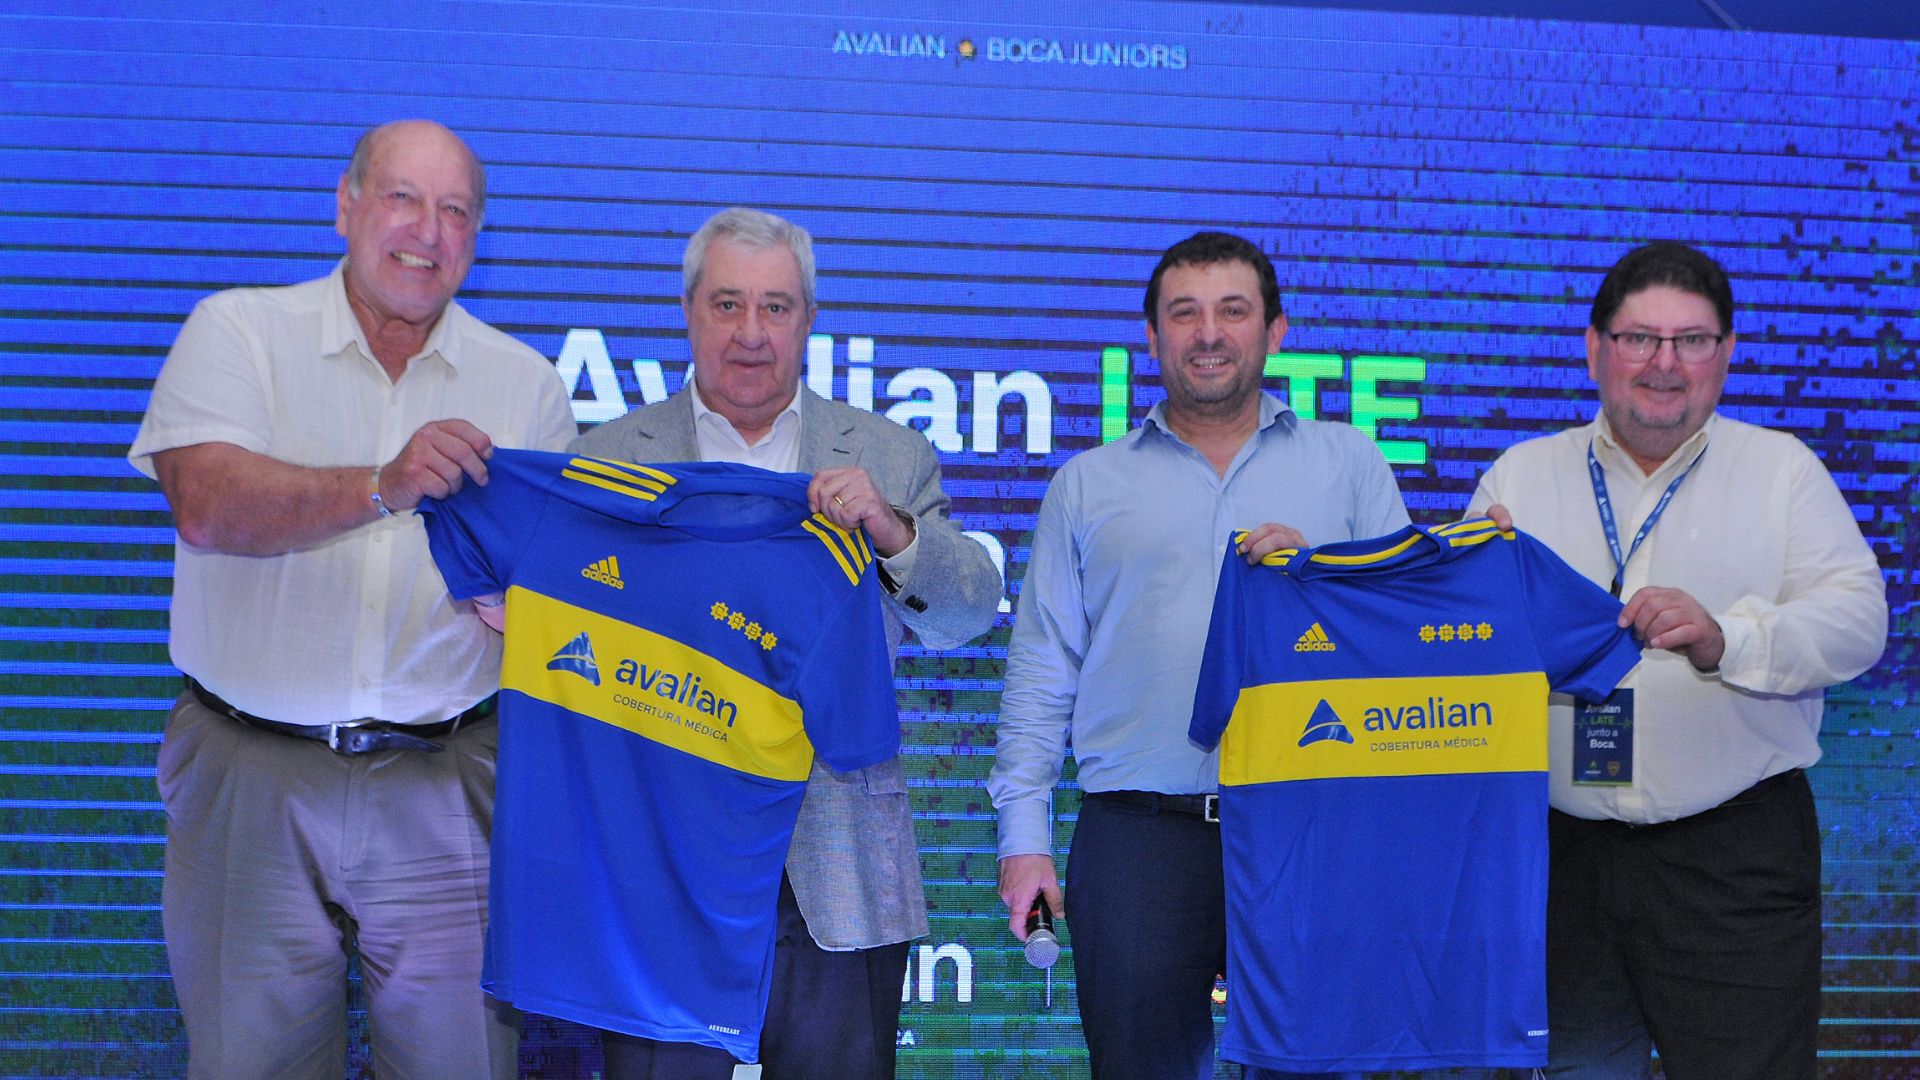 From left to right: Emilio Nana (president of the Boca medical department), Jorge Amor Ameal (president of Boca), Guillermo Bulleri (general manager of Avalian) and Horacio Luis Quarin (president of Avalian) (Credit: Avalian Press)